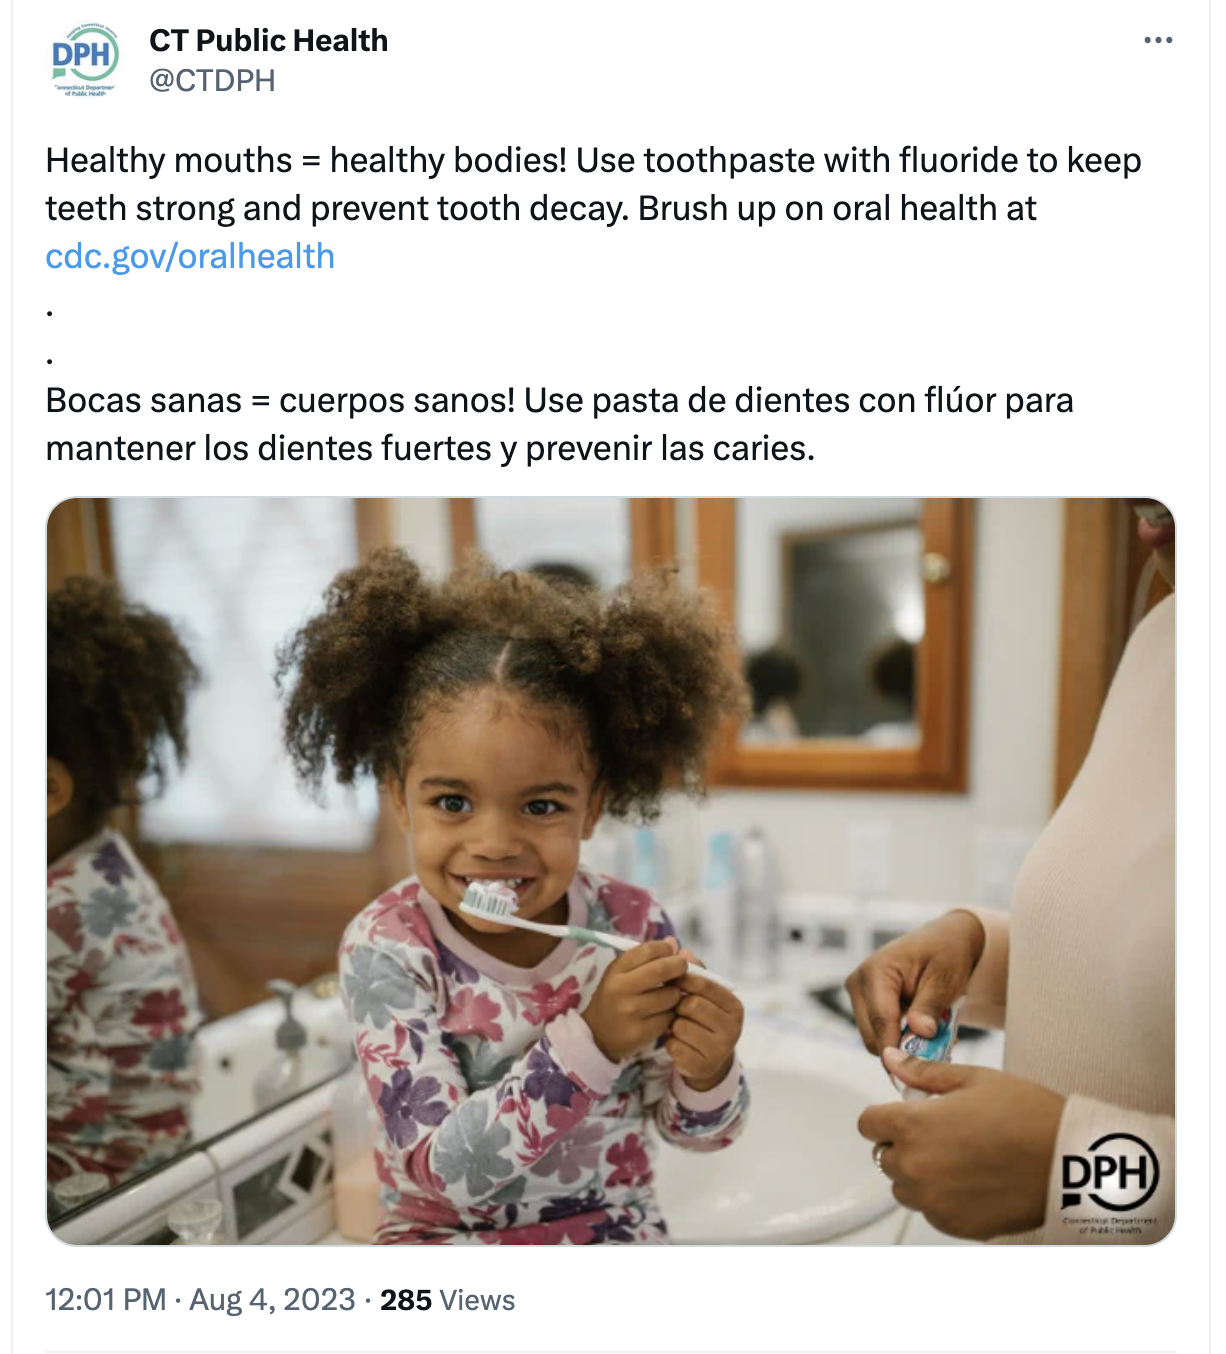 Please Follow us on Gab, Minds, Telegram, Rumble, Gettr, Truth Social, Twitter Source: X (formerly Twitter.com) The Connecticut Department of Health (CTDPH) is encouraging toothpaste with fluoride for children, despite evidence that links fluoride to neurodevelopmental damage in children, according to the National Toxicology Program (NTP).